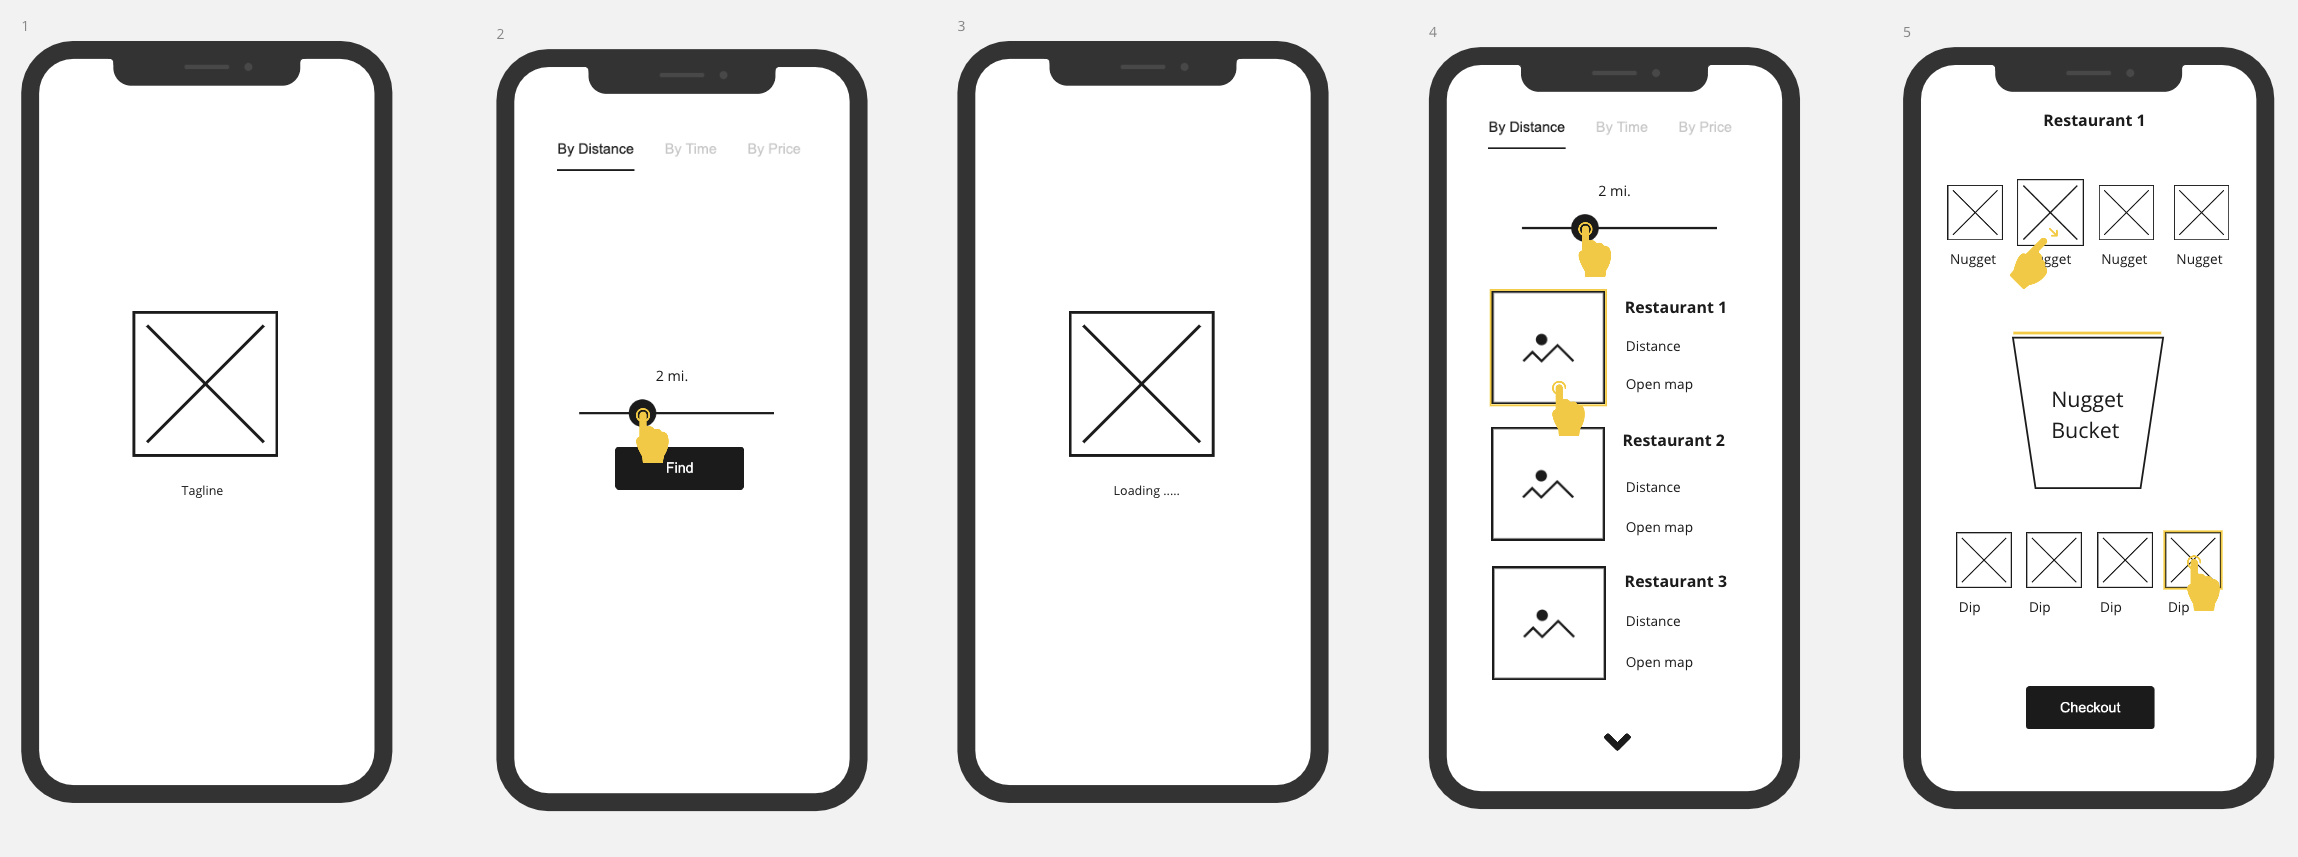 The sitemap was converted into wireframes which helped in defining the hierarchy and structure of the app before any UI design implementation.